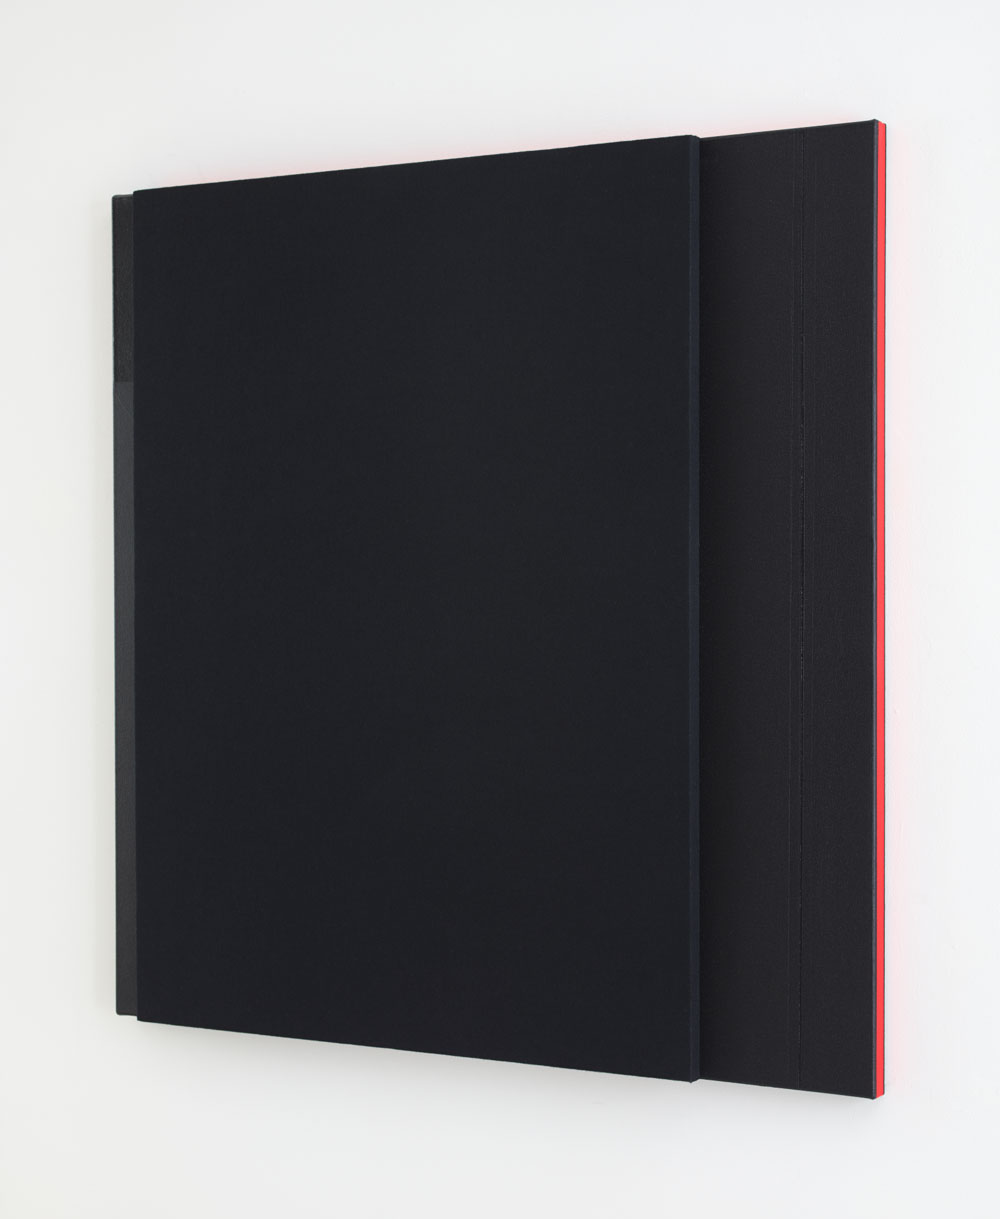  Deep Tone with Bold Double Bar Line, 2014 --Acoustic absorber panel and acrylic paint on canvas 48 x 48 inches 